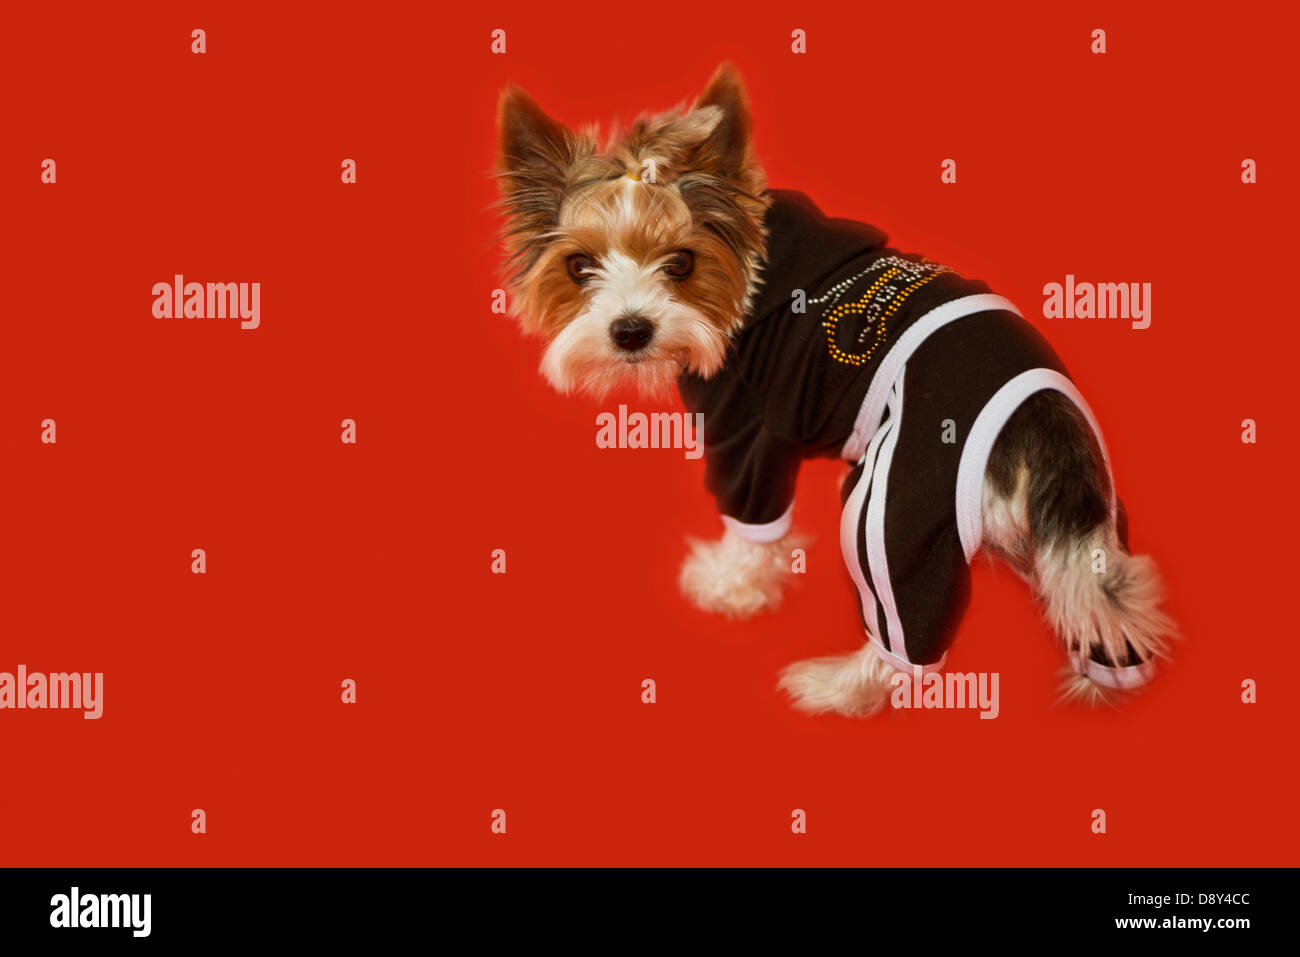 Silky terrier turned back for reciving a sweet. Focus on muzzle. Stock Photo